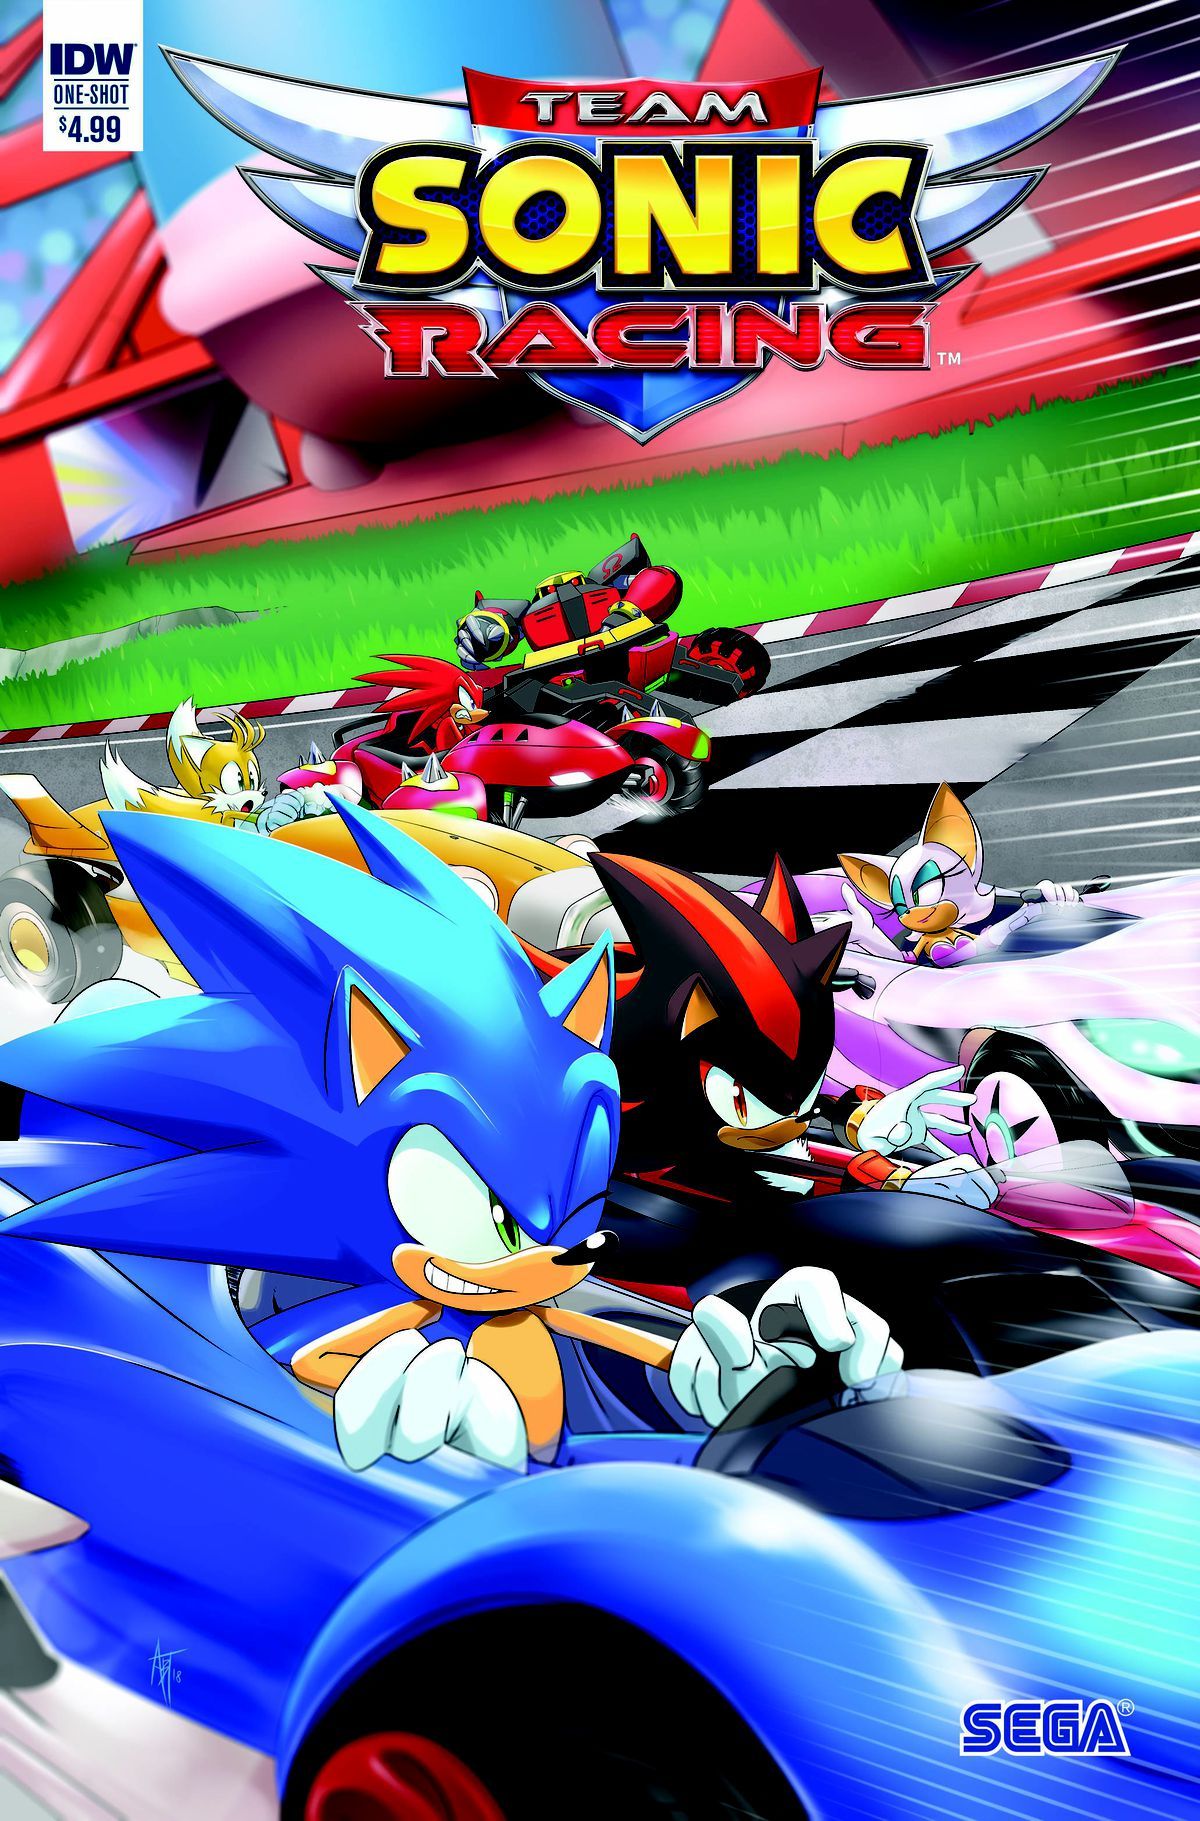 Team Sonic Racing to get special prequel comic